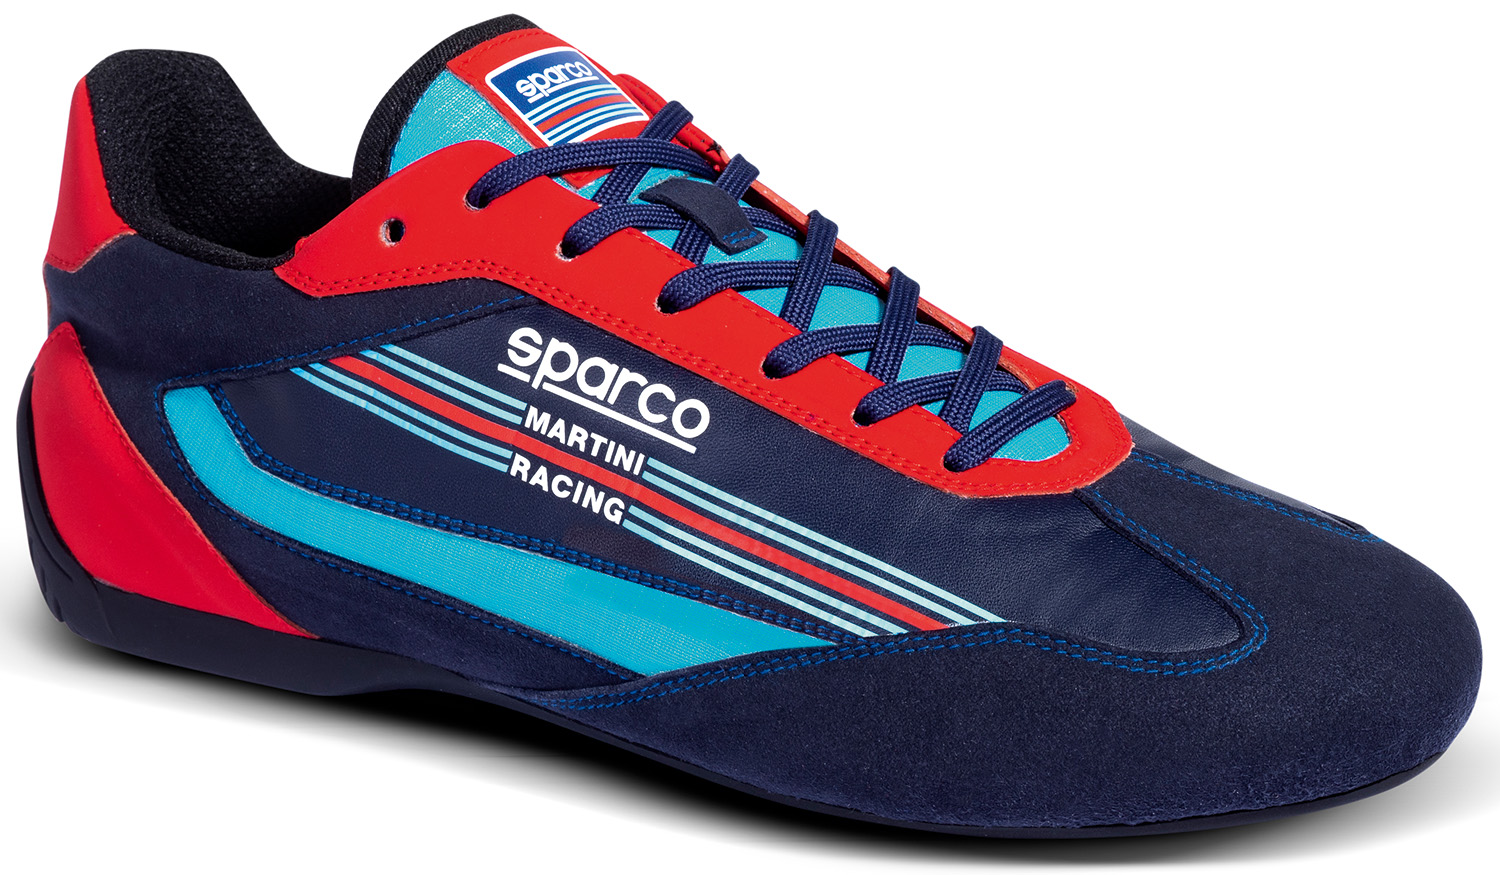 Sparco Freizeitschuh S-DRIVE Martini Racing